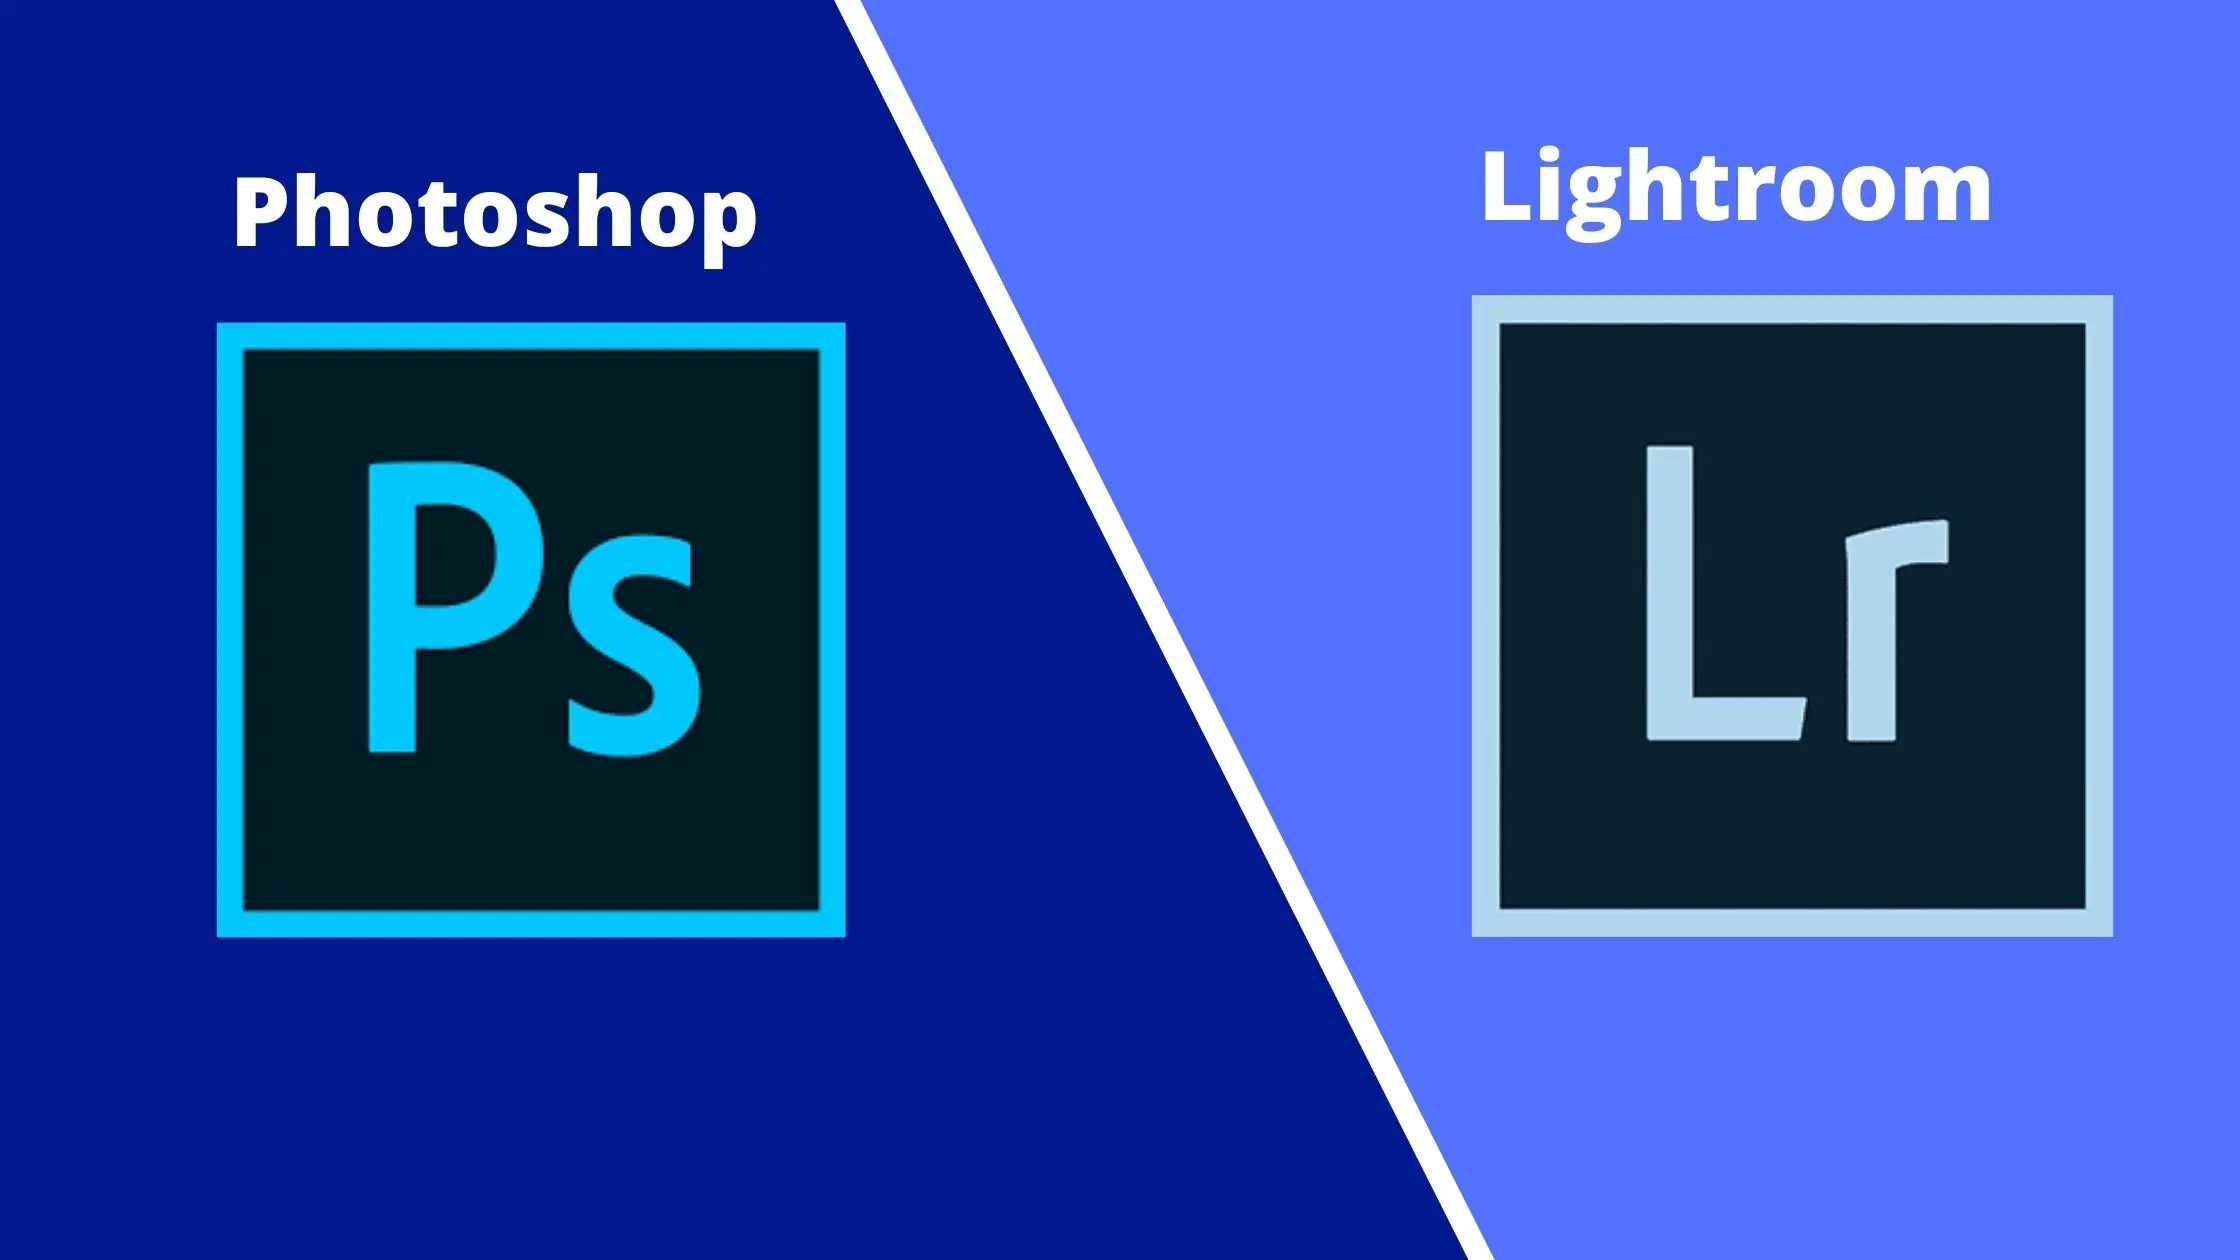 Photoshop vs Lightroom: What is the difference? - Teknologya